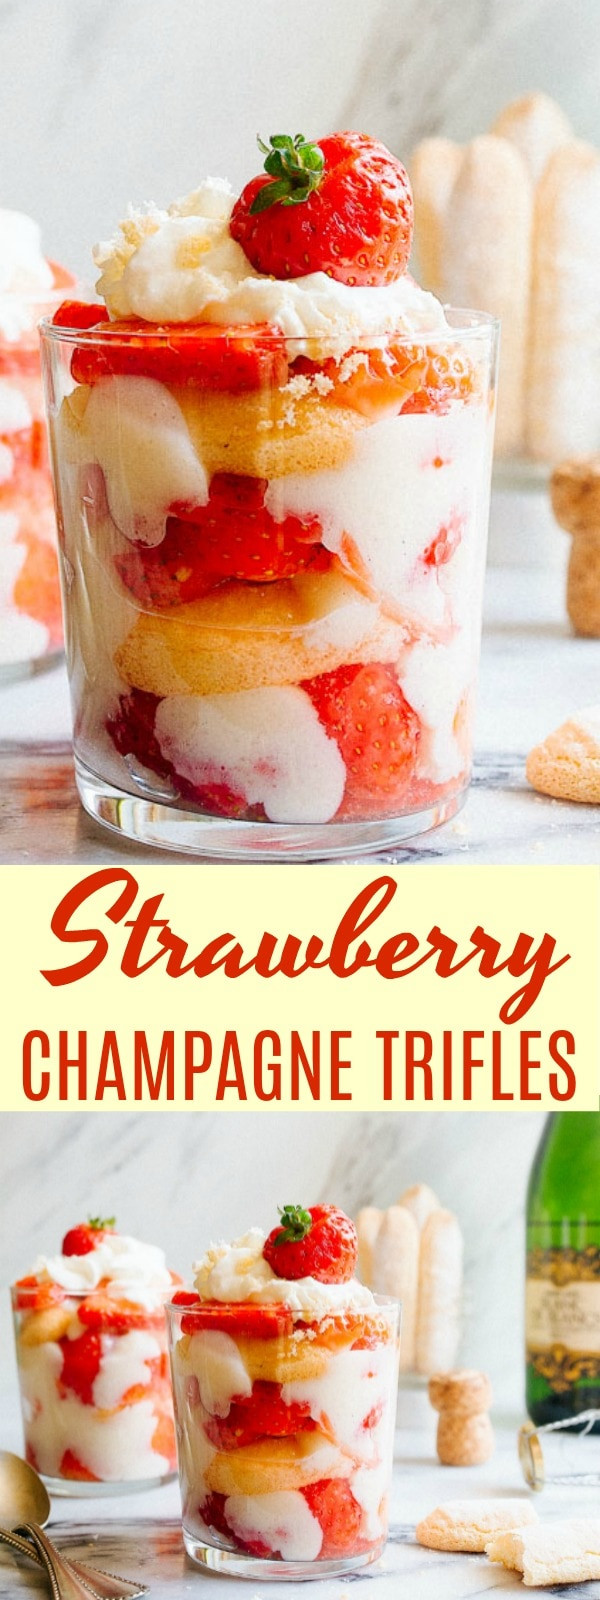 Easy New Year'S Eve Desserts
 Strawberry Champagne Trifles for Two